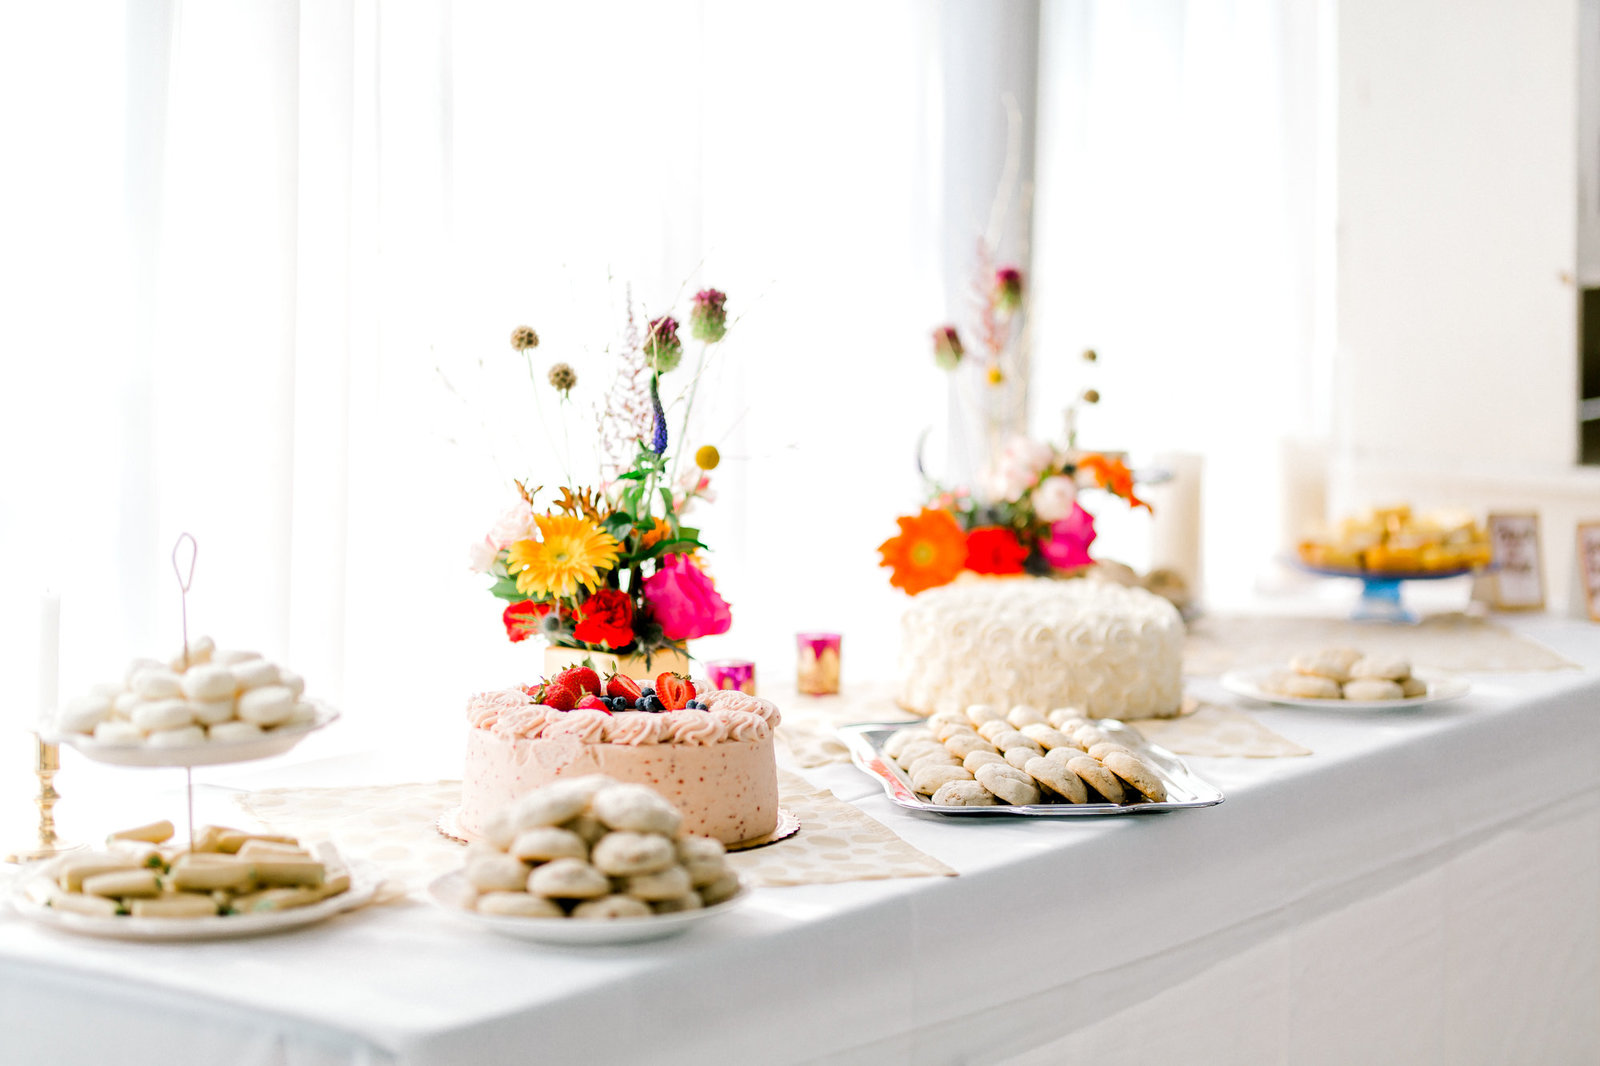 sweet table on the wedding day Chicago wedding pictures by Chicago wedding photographer bozena voytko